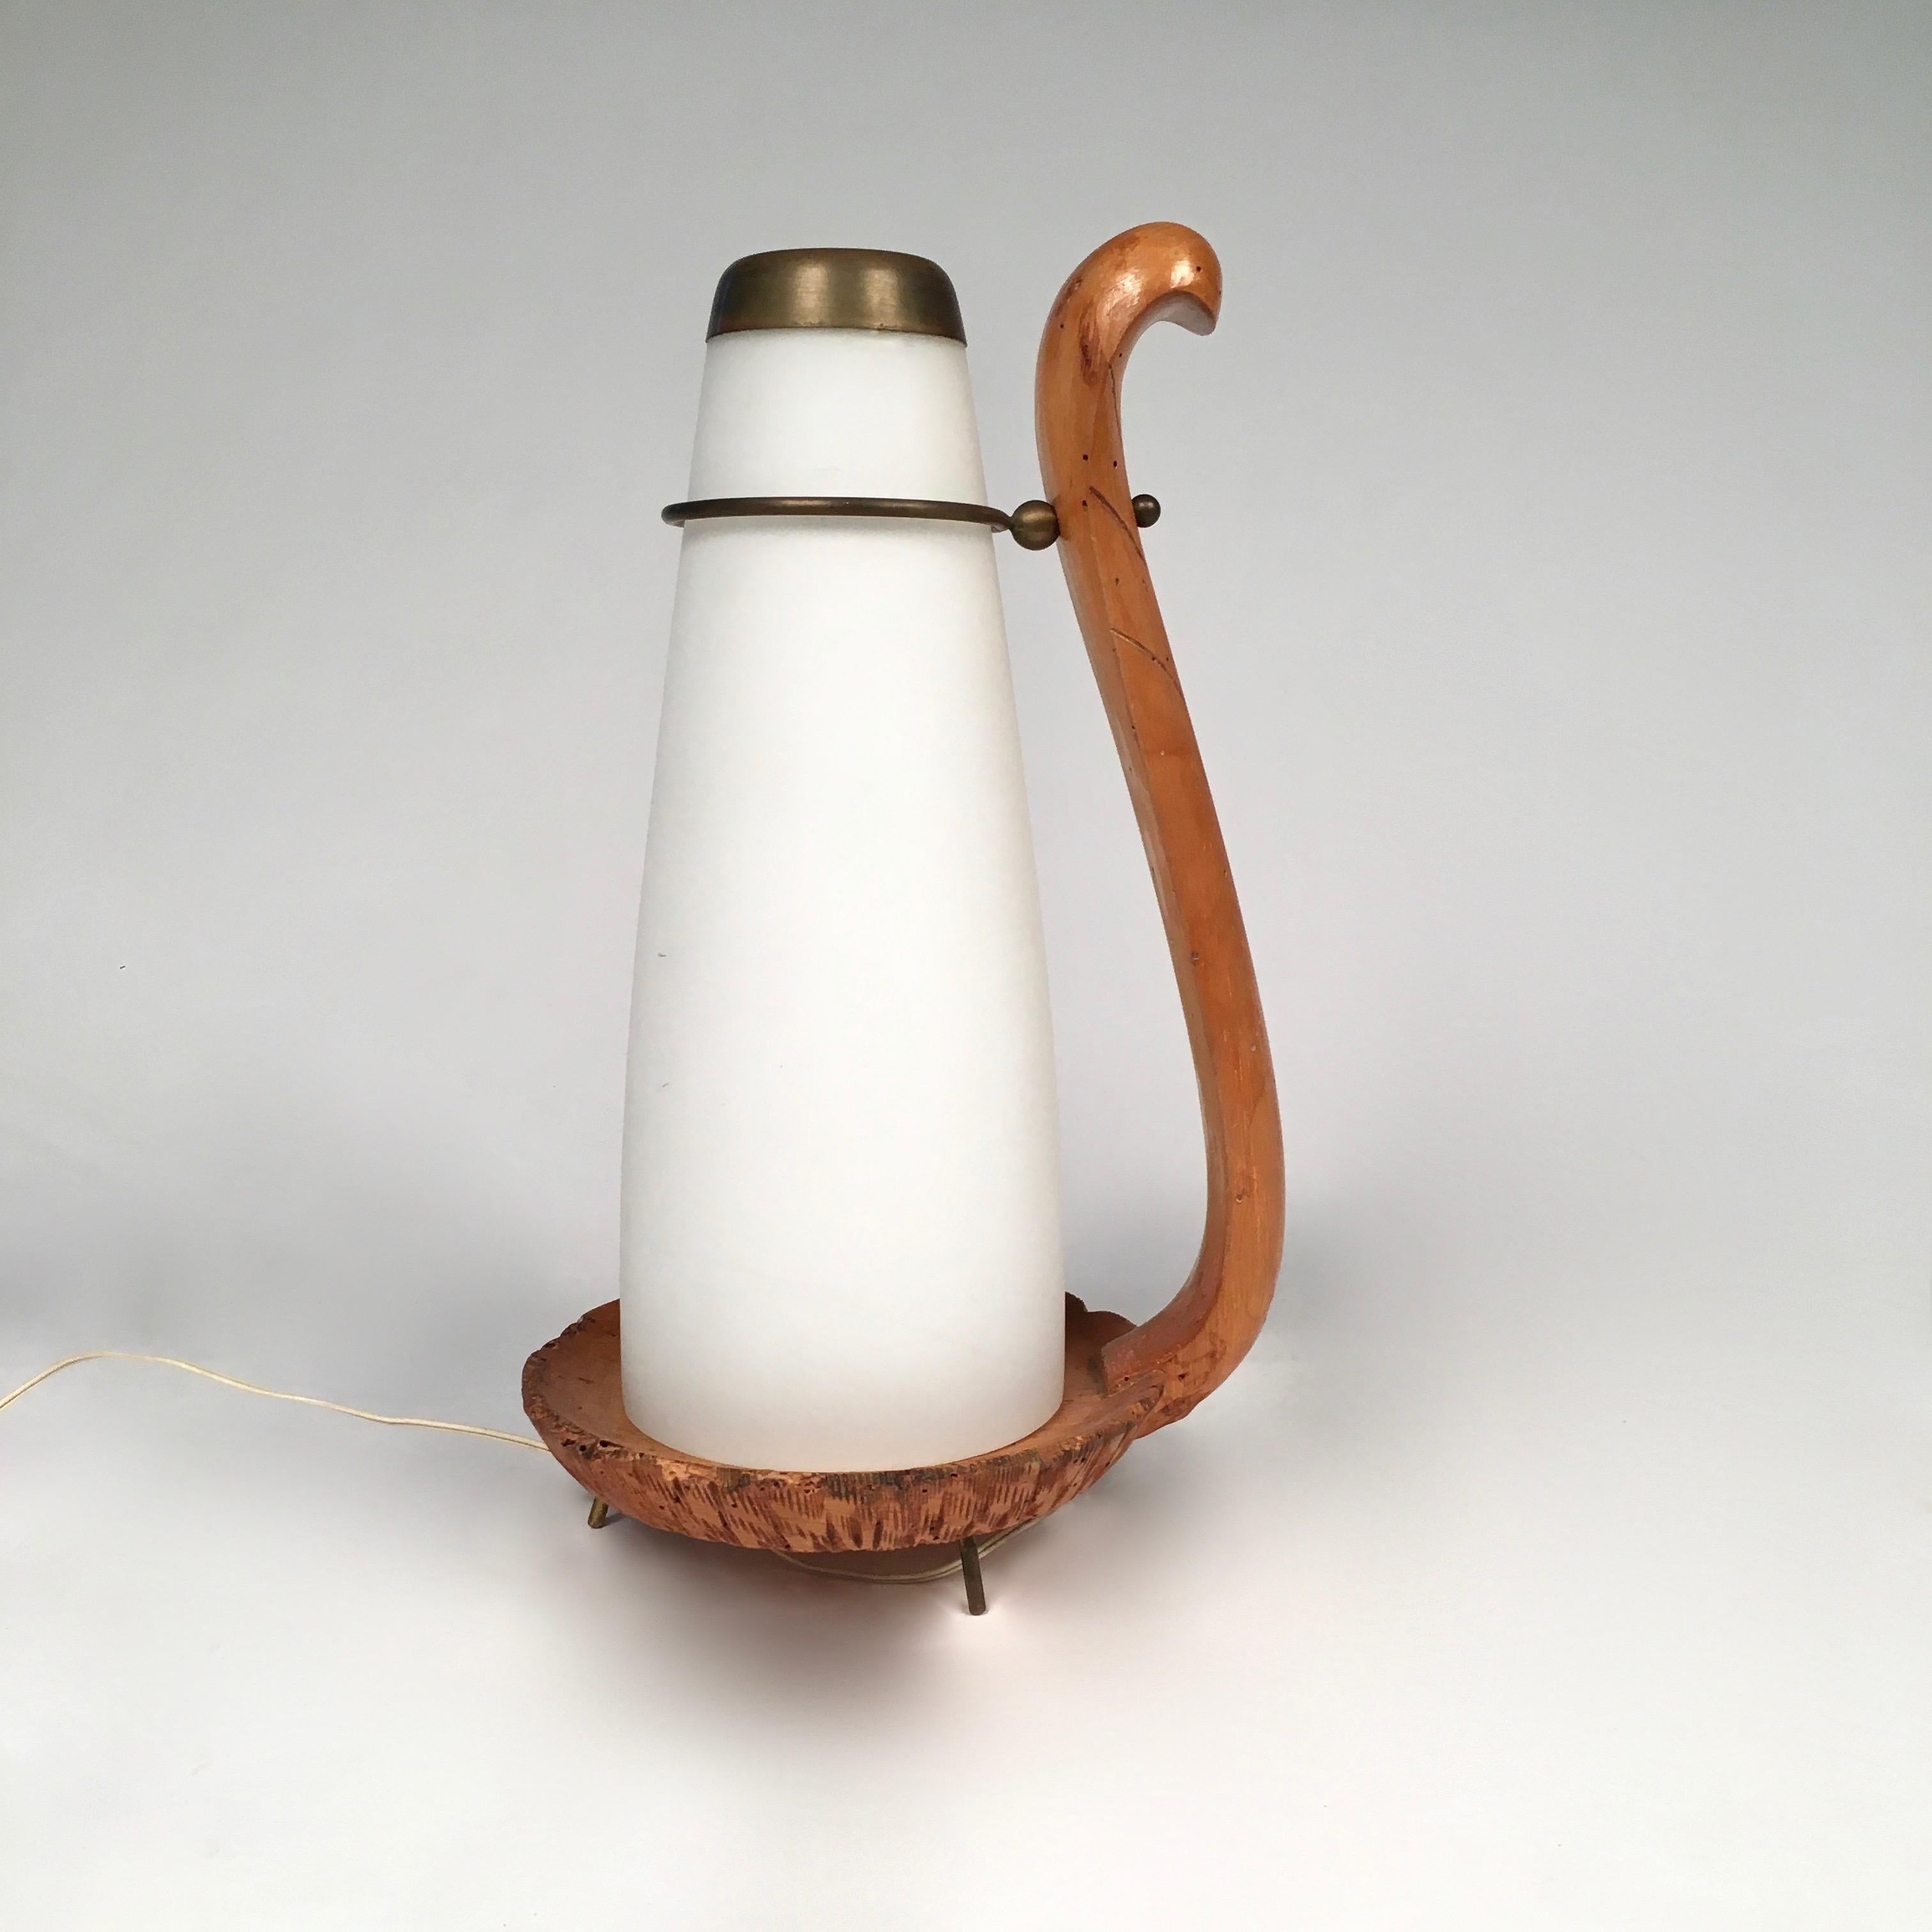 This particular and sophisticated snake lamp made by Aldo Tura is most likely a unique protoype lamp. Aldo Tura lamps were done in small editions, thus the details and level of sophistication in carving on this particular lamp would be impossible to